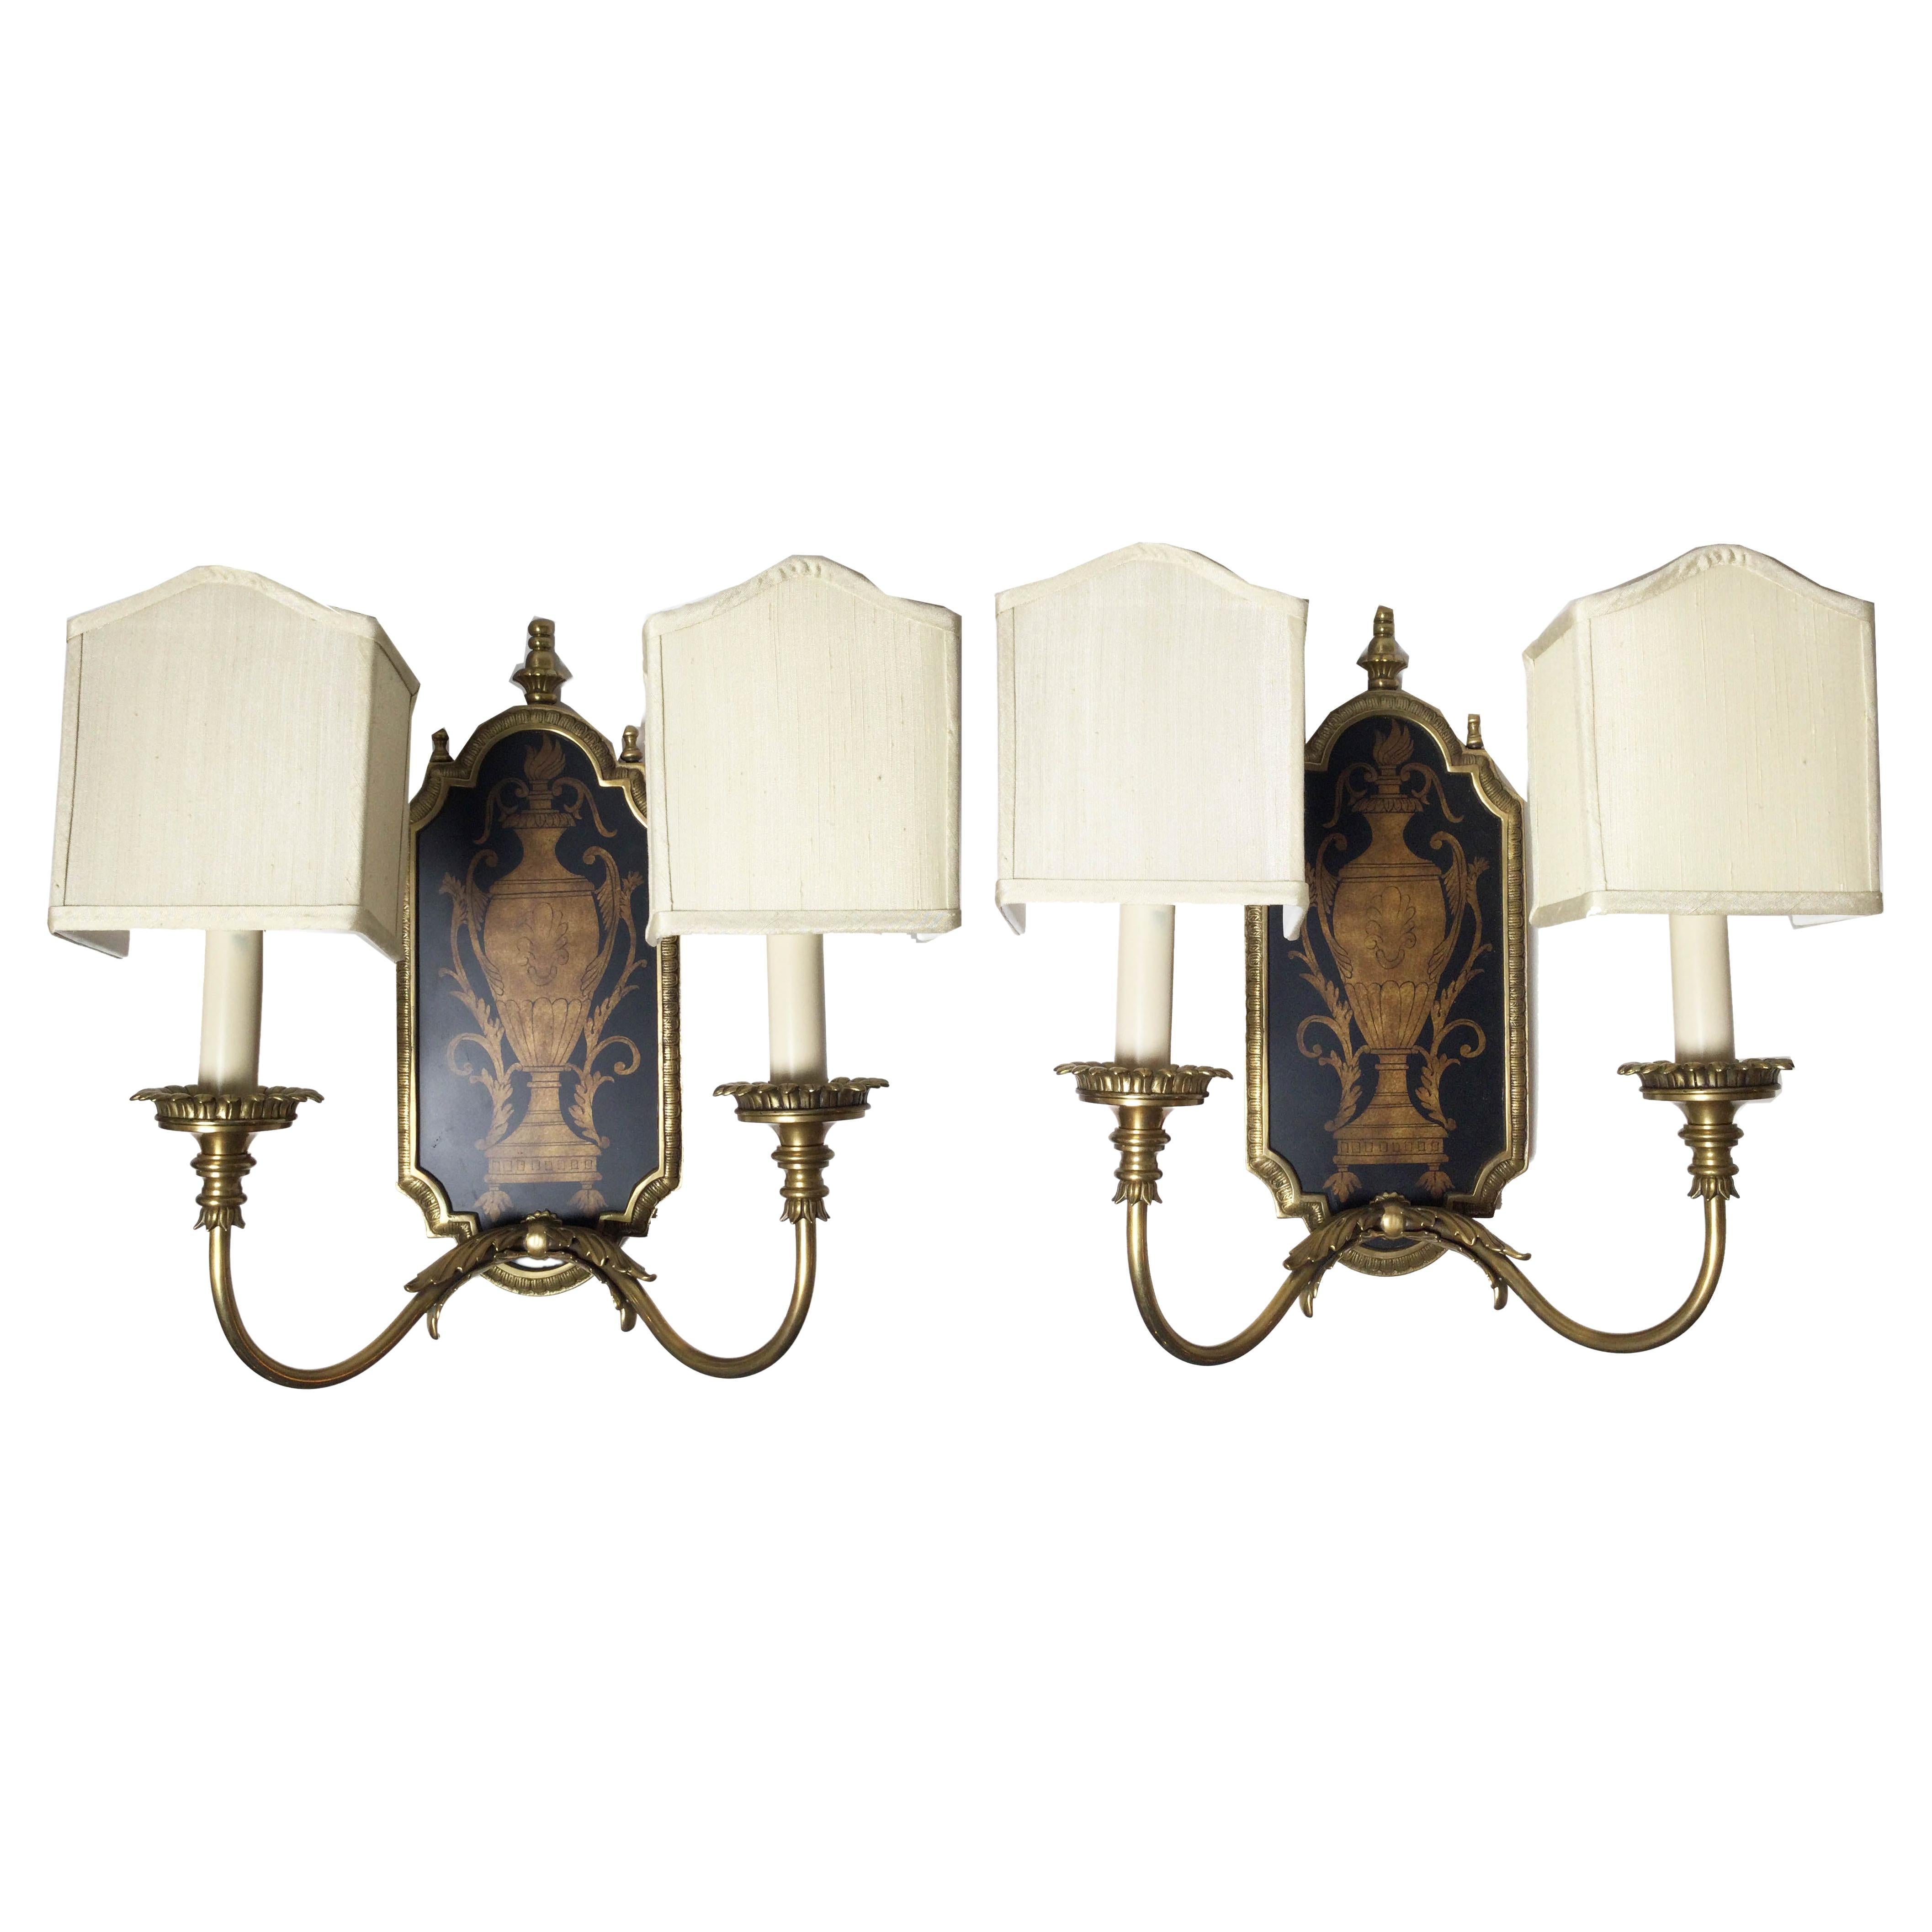 A Pair of Elegant Cast Brass and Wood Panel Two Light Sconces